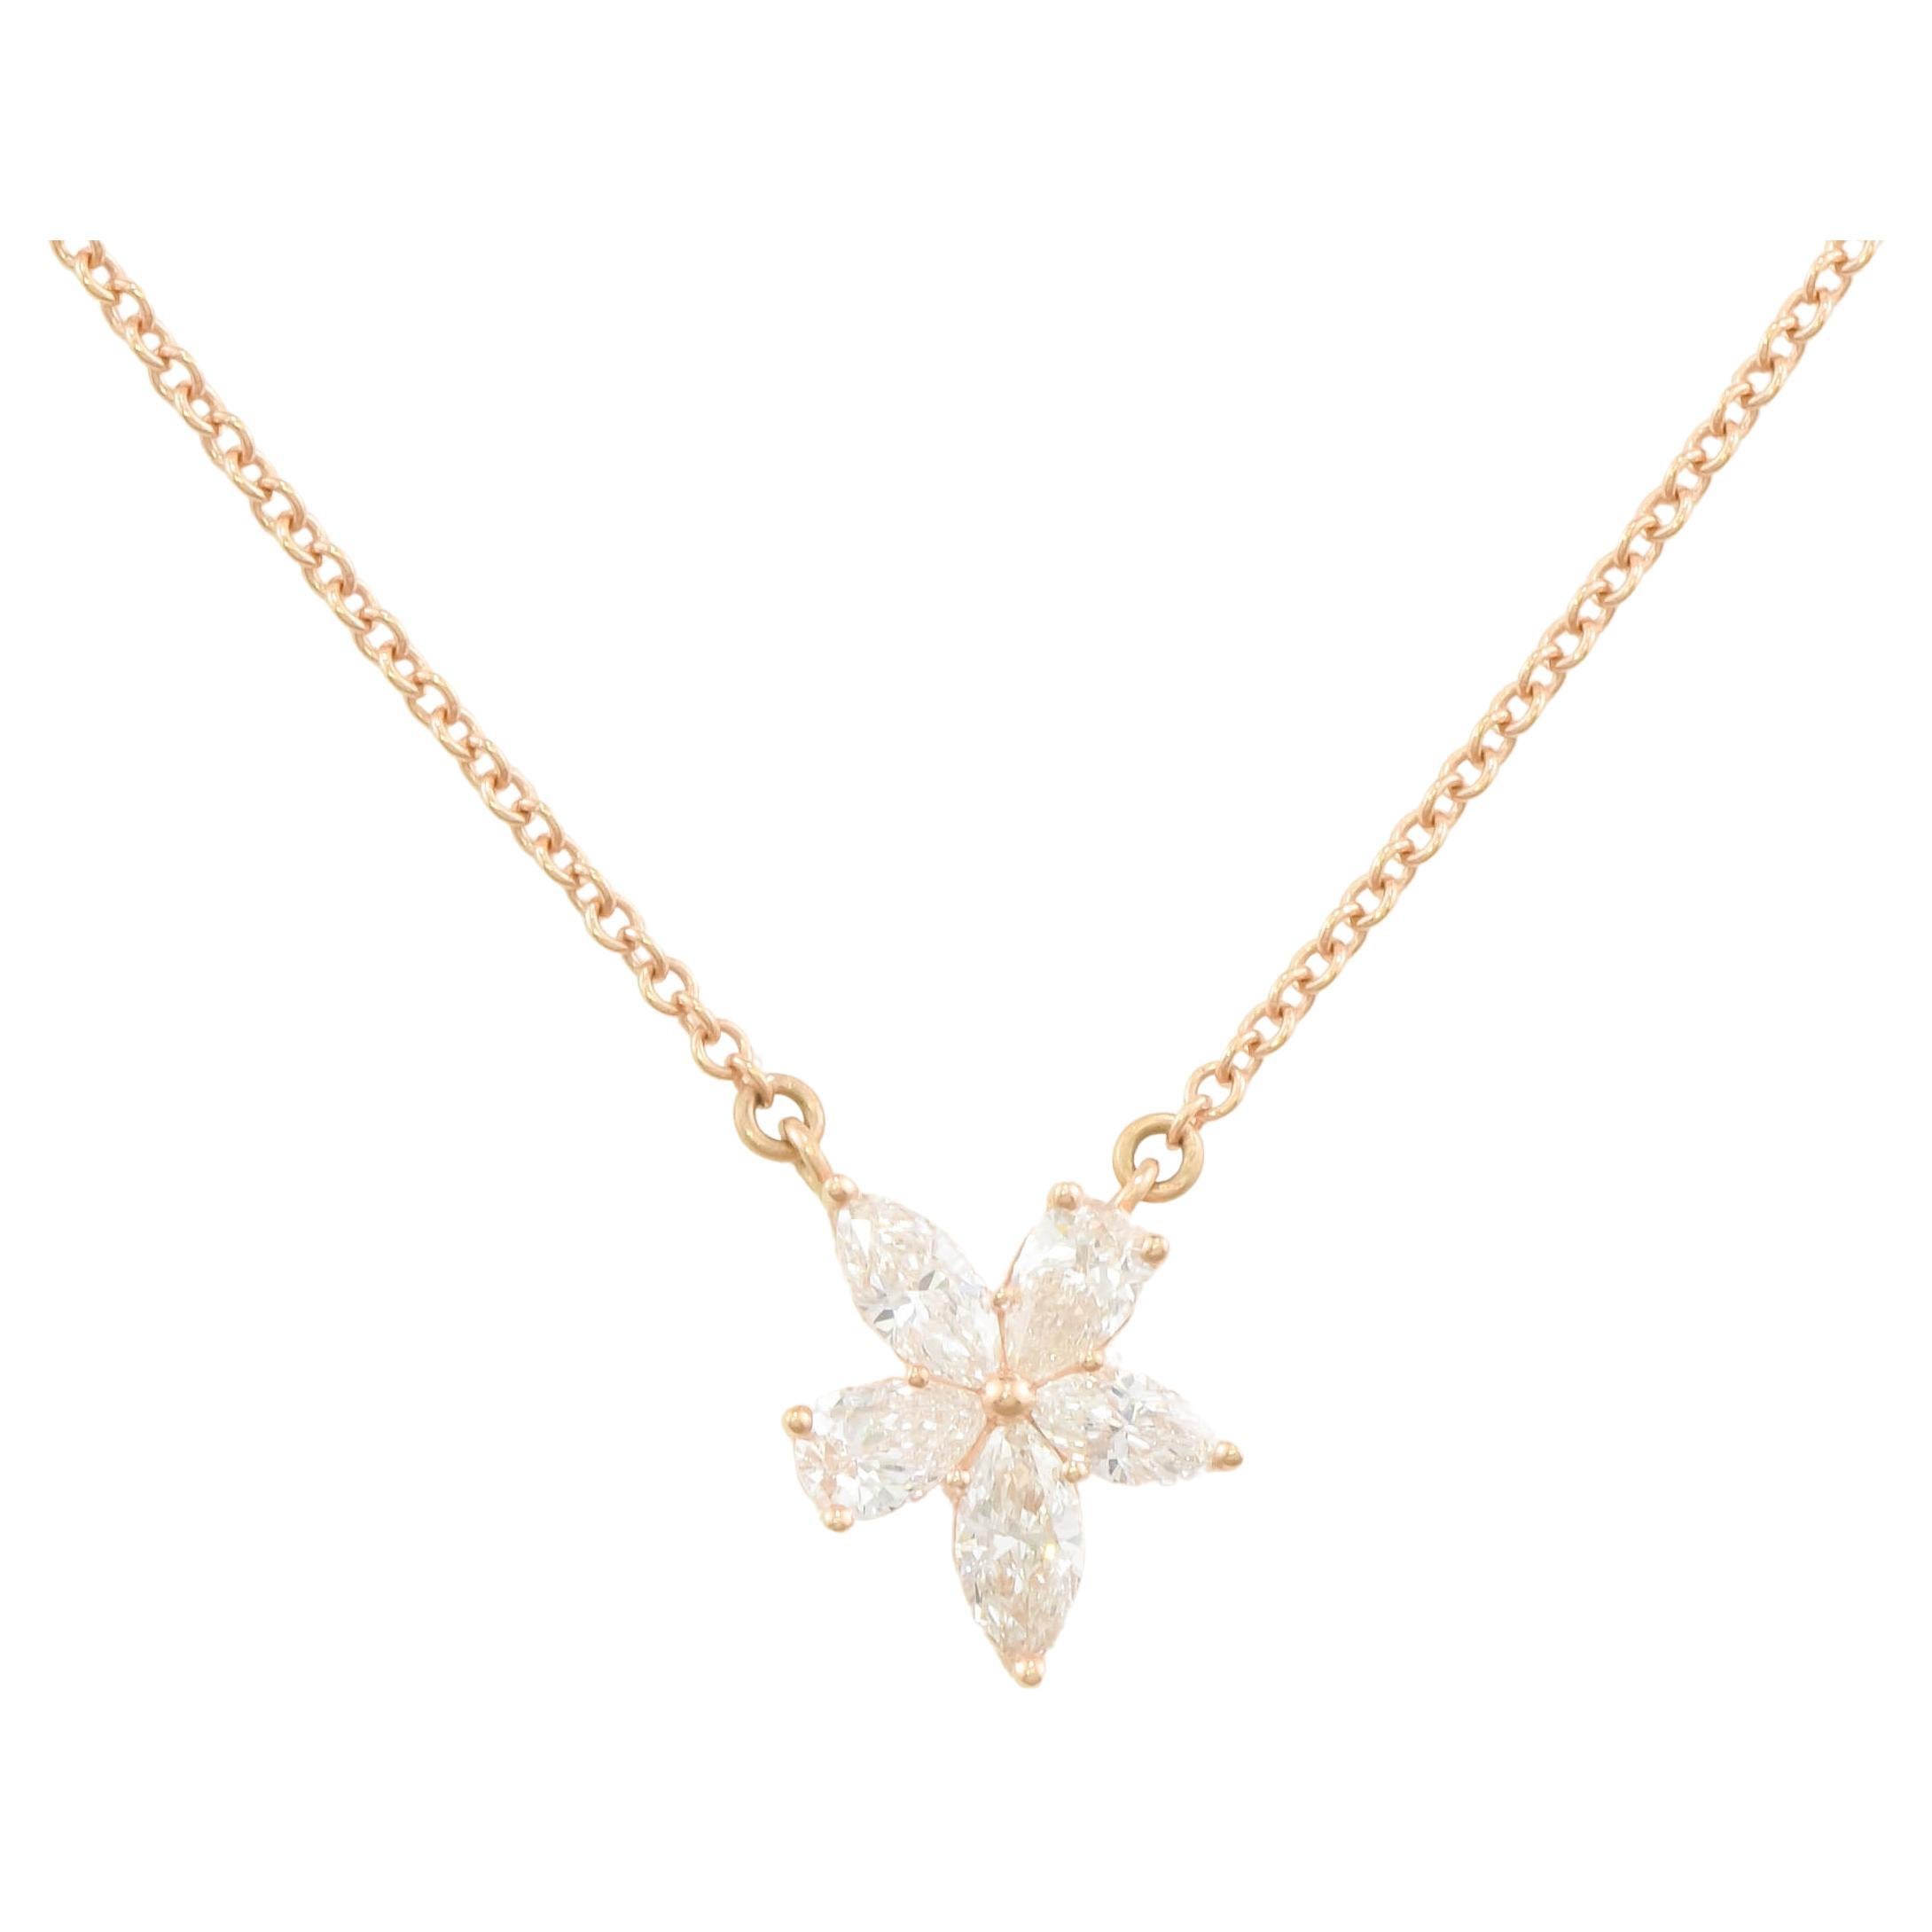 Tiffany & Co. Diamond Victoria Necklace, Mixed Cluster Flower in 18K Rose Gold